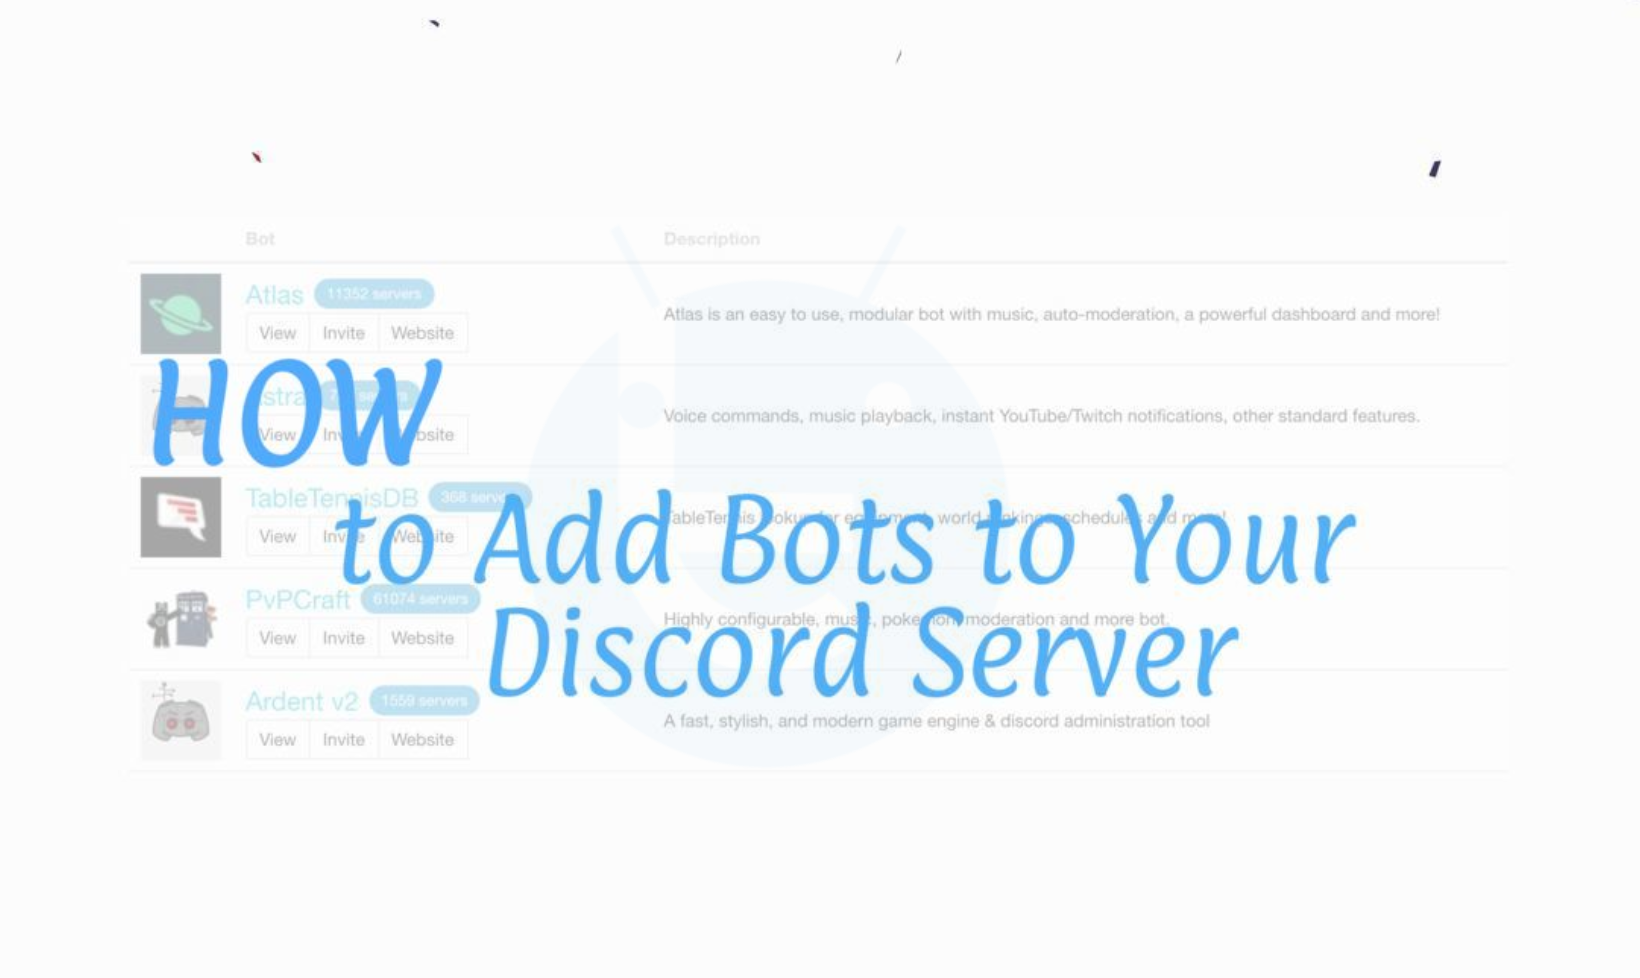 Add Bots to Your Discord Server